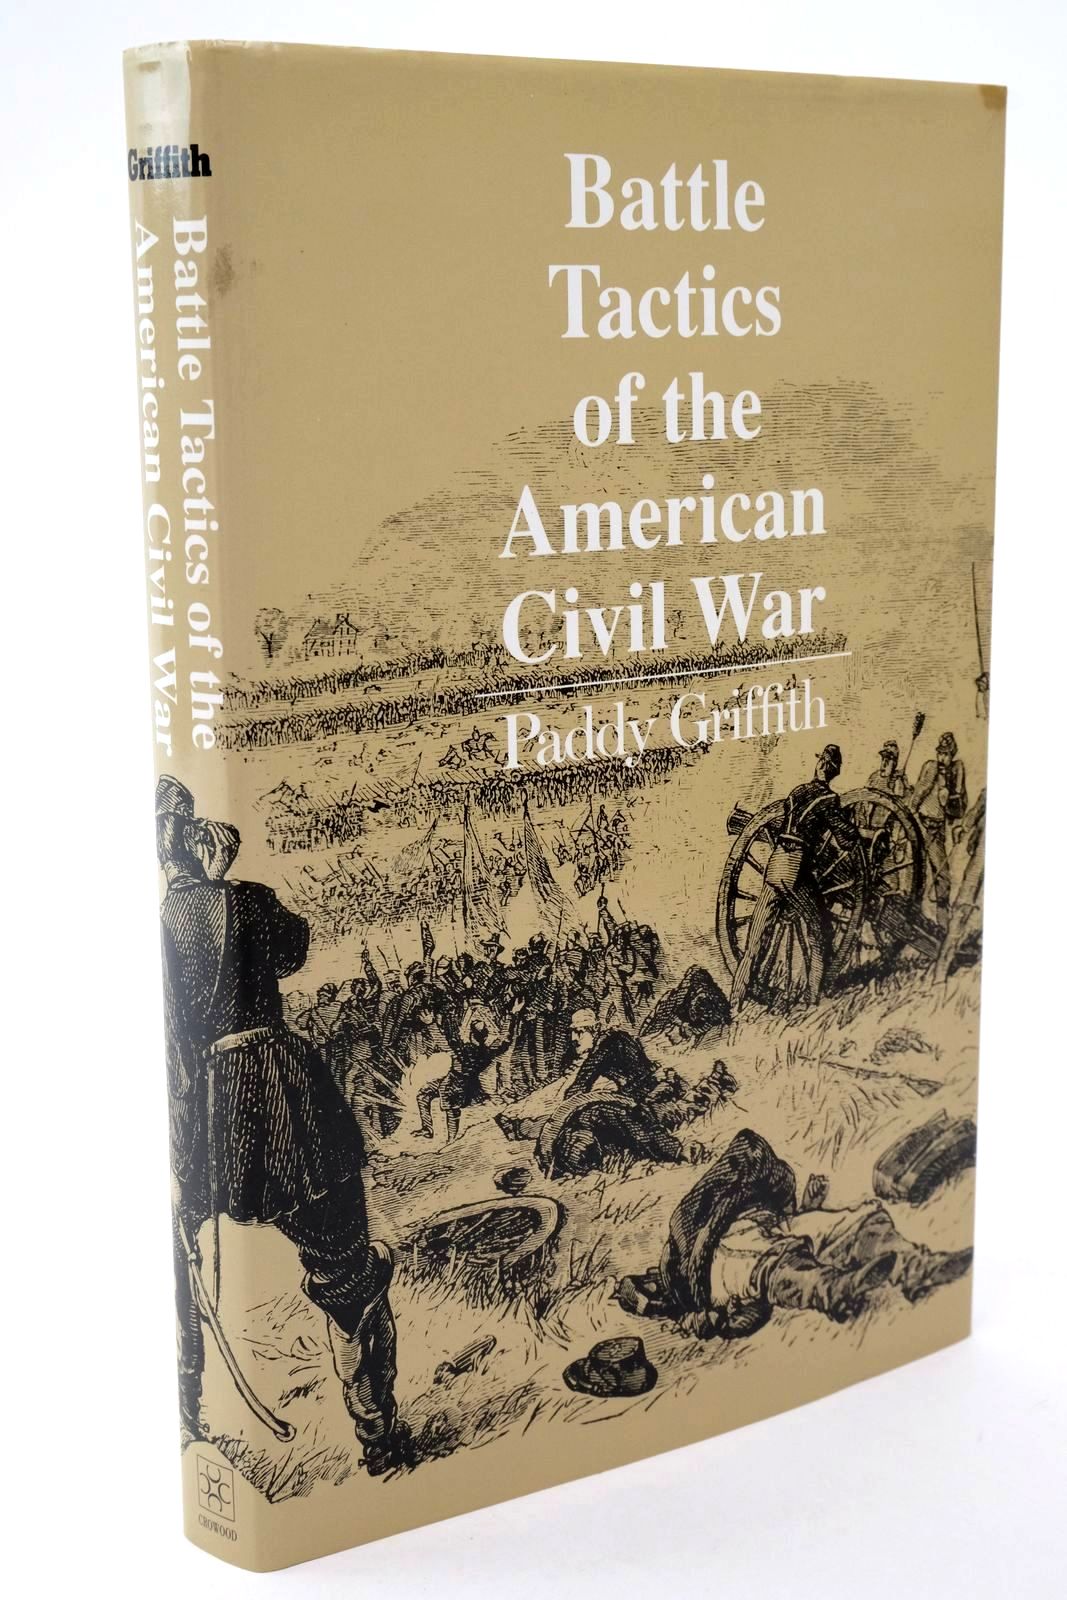 Photo of BATTLE TACTICS OF THE AMERICAN CIVIL WAR written by Griffith, Paddy published by The Crowood Press (STOCK CODE: 1322531)  for sale by Stella & Rose's Books